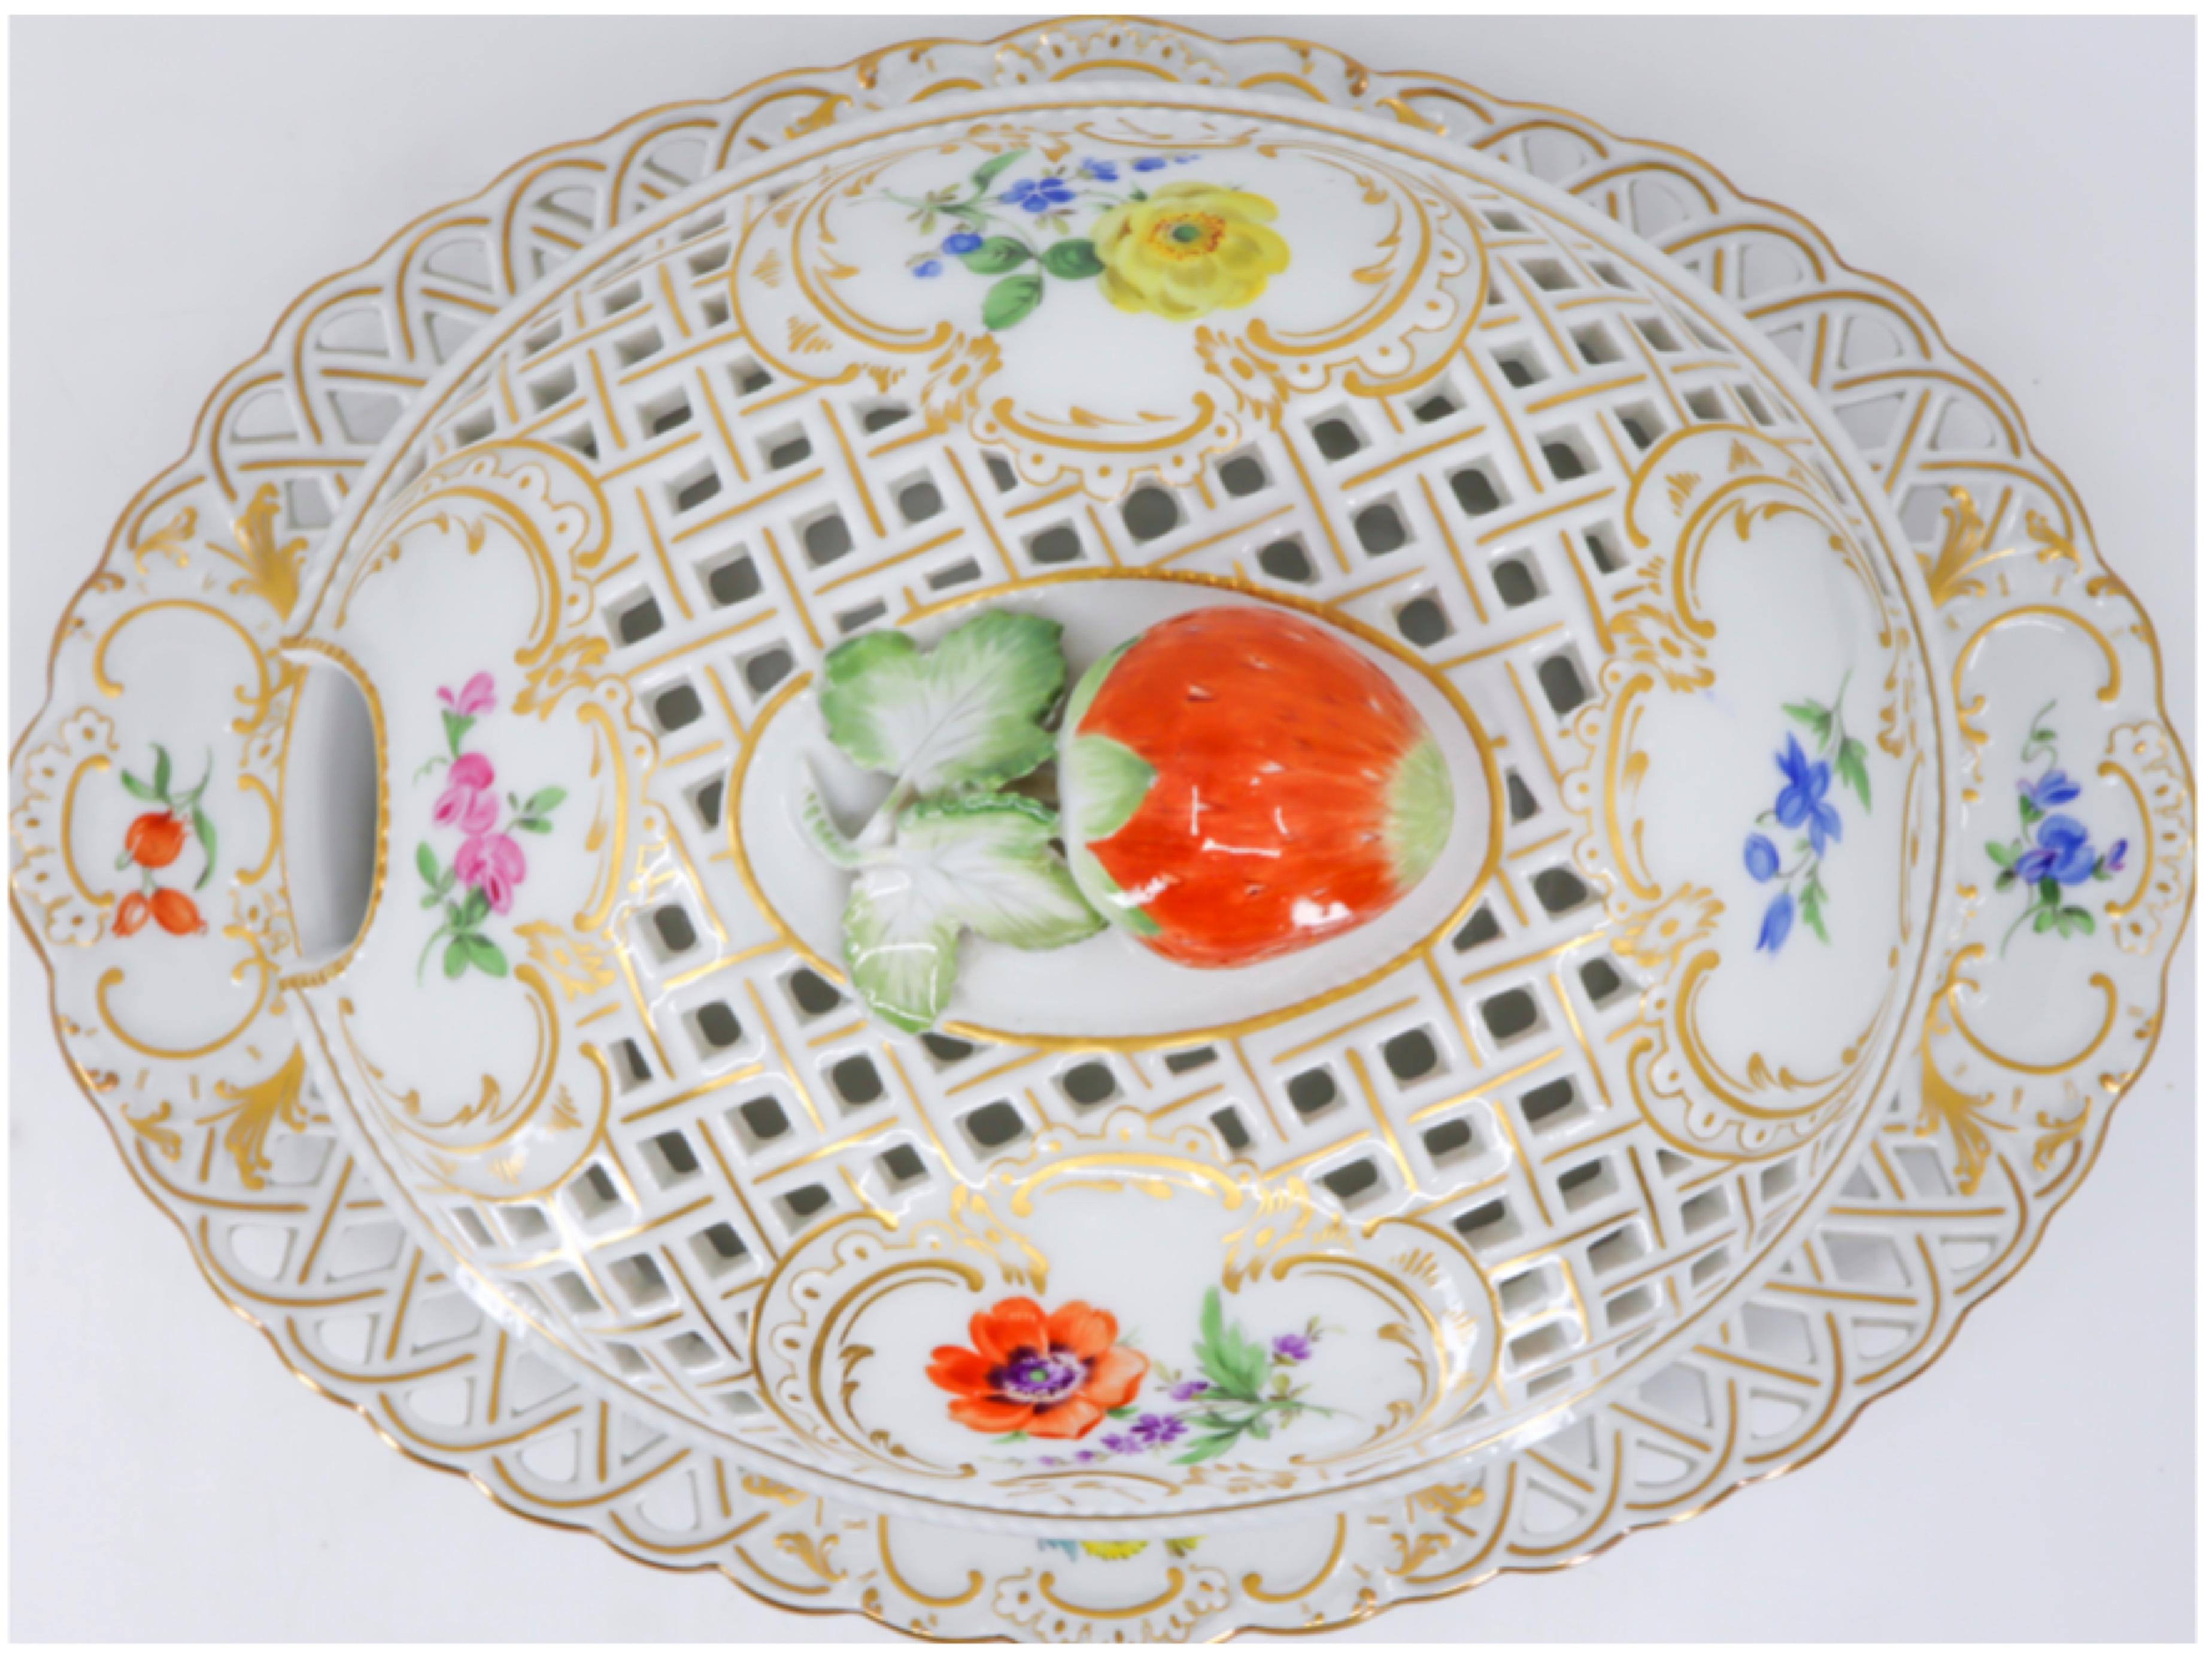 German hand painted porcelain bowl with flowers, the lid of the bowl has a strawberry finial, finely painted with flowers enclosed in cartouches on both lid and plate with open work, gilded pattern throughout. Opening for spoon insert on the lid